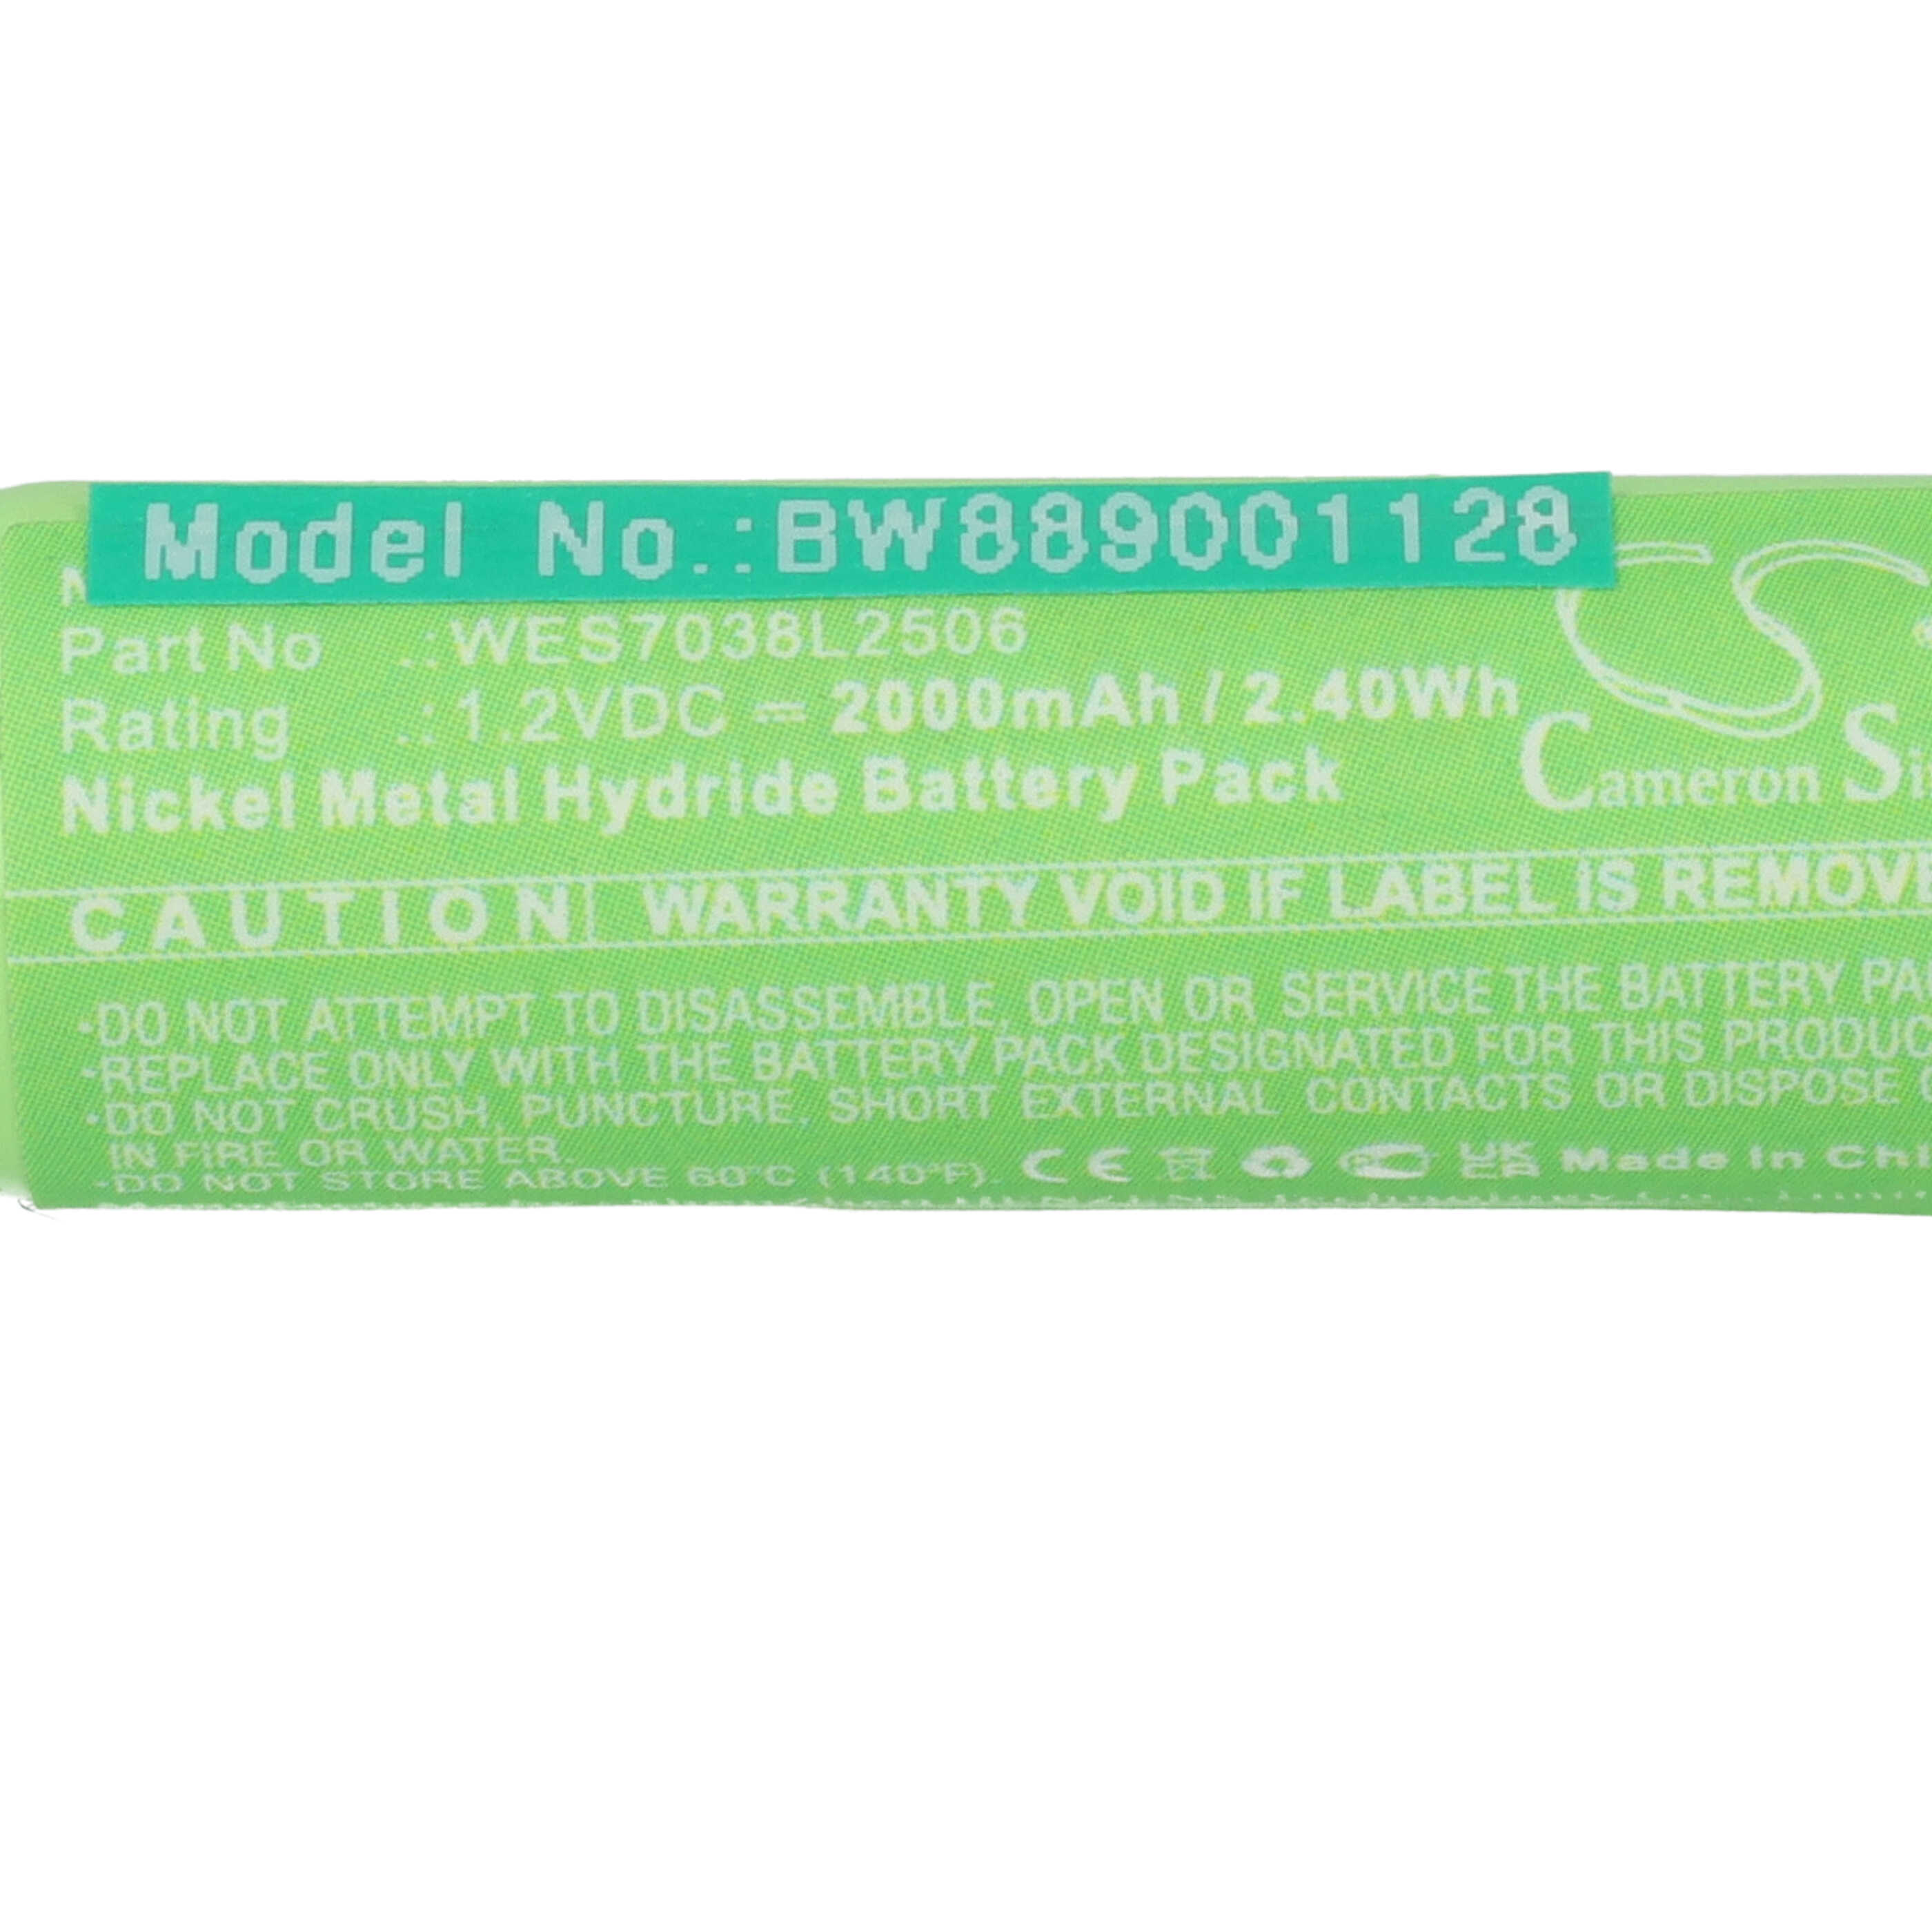 Electric Razor Battery Replacement for Panasonic WES7038L2507, WERGB80L2508, WES7038L2506 - 2000mAh 1.2V NiMH